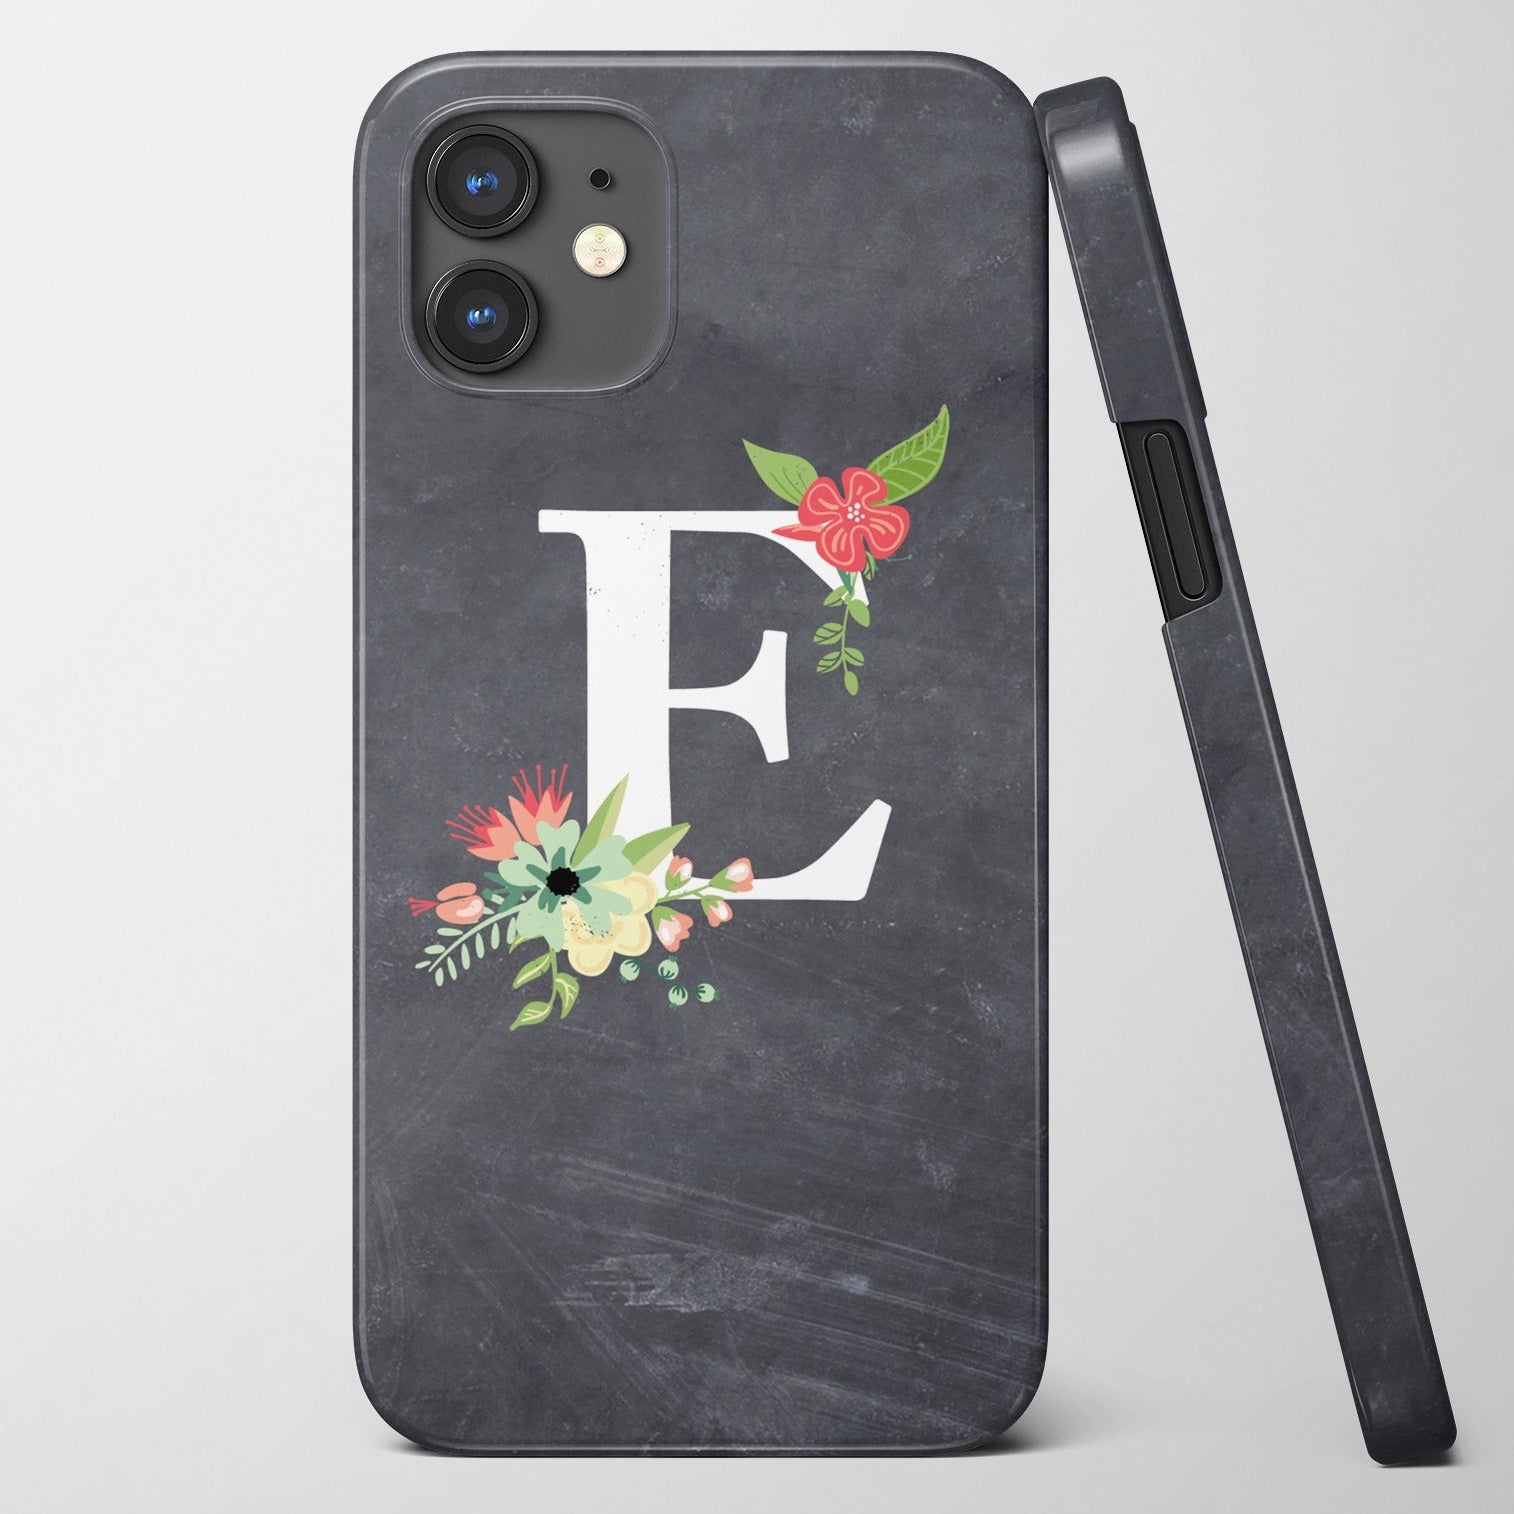 Premium iPhone case with a floral initial on a chalkboard-look case